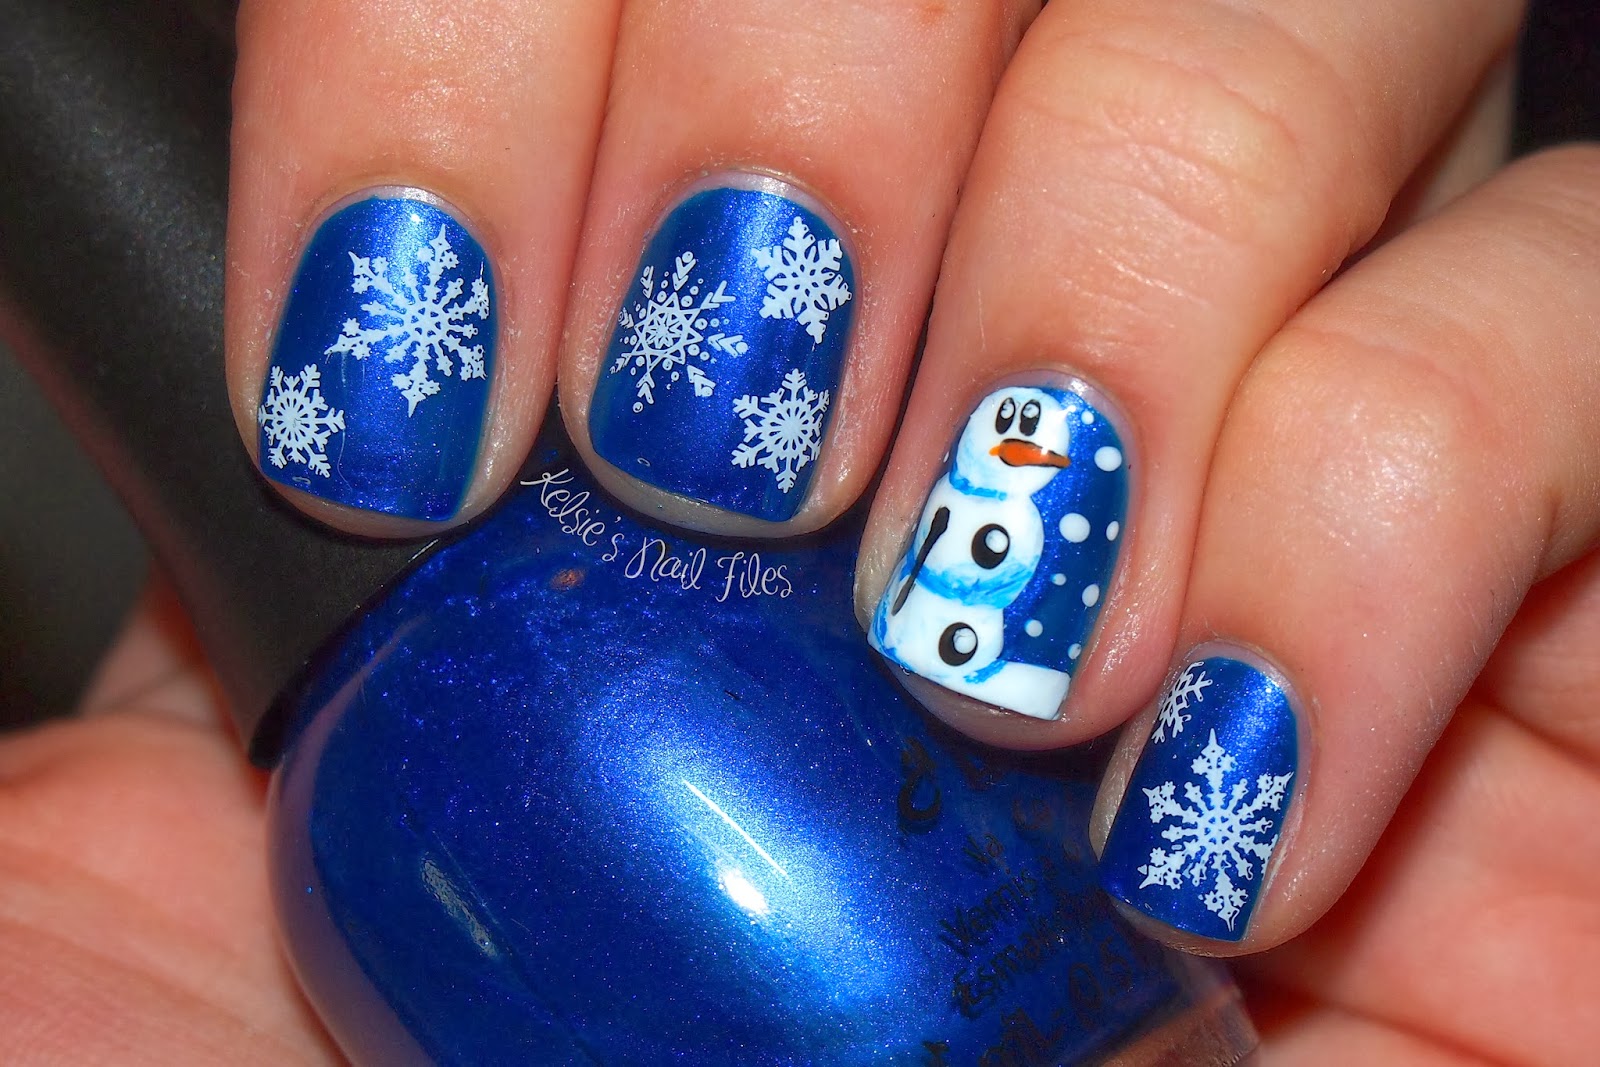 1. "10 Fall and Winter Nail Art Ideas" - wide 7